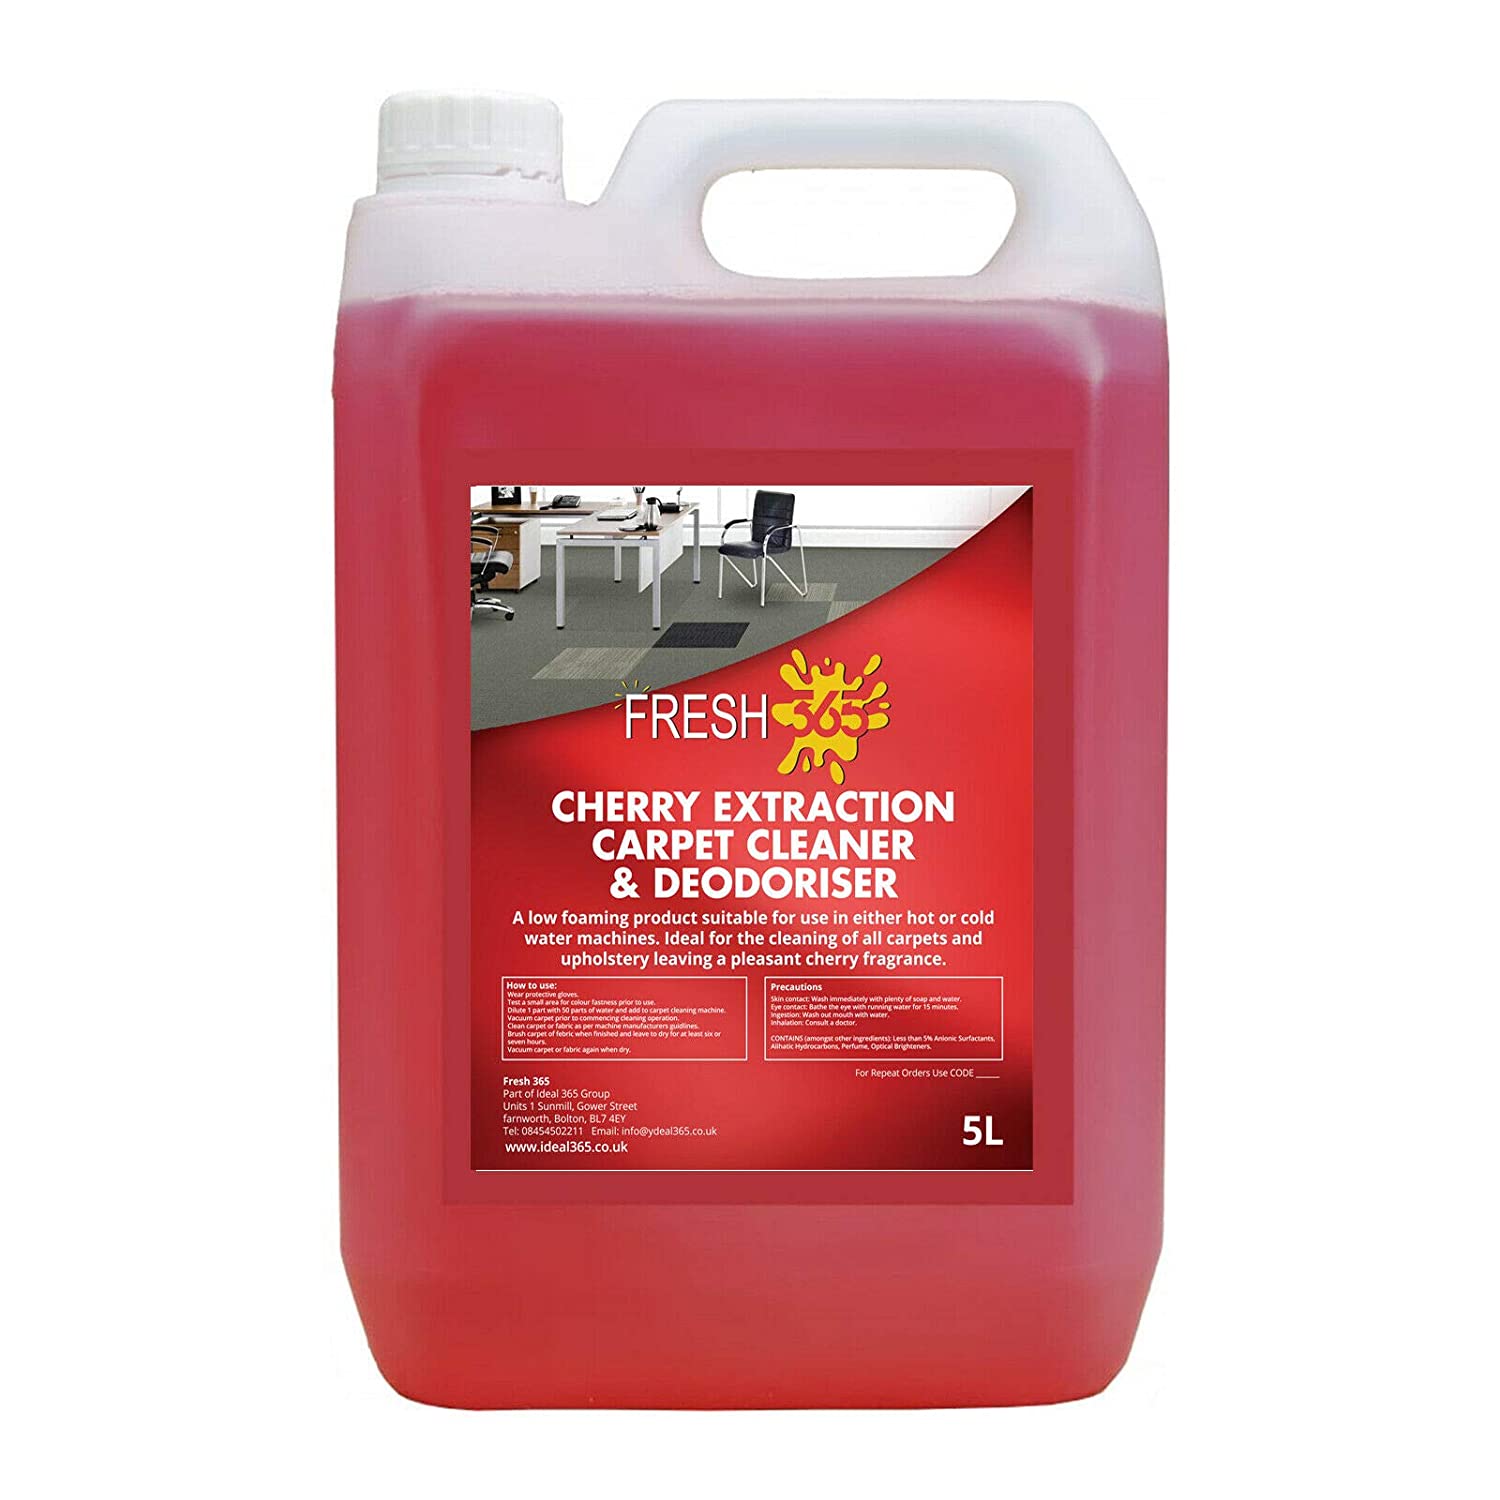 Cherry extraction carpet cleaner 5l 